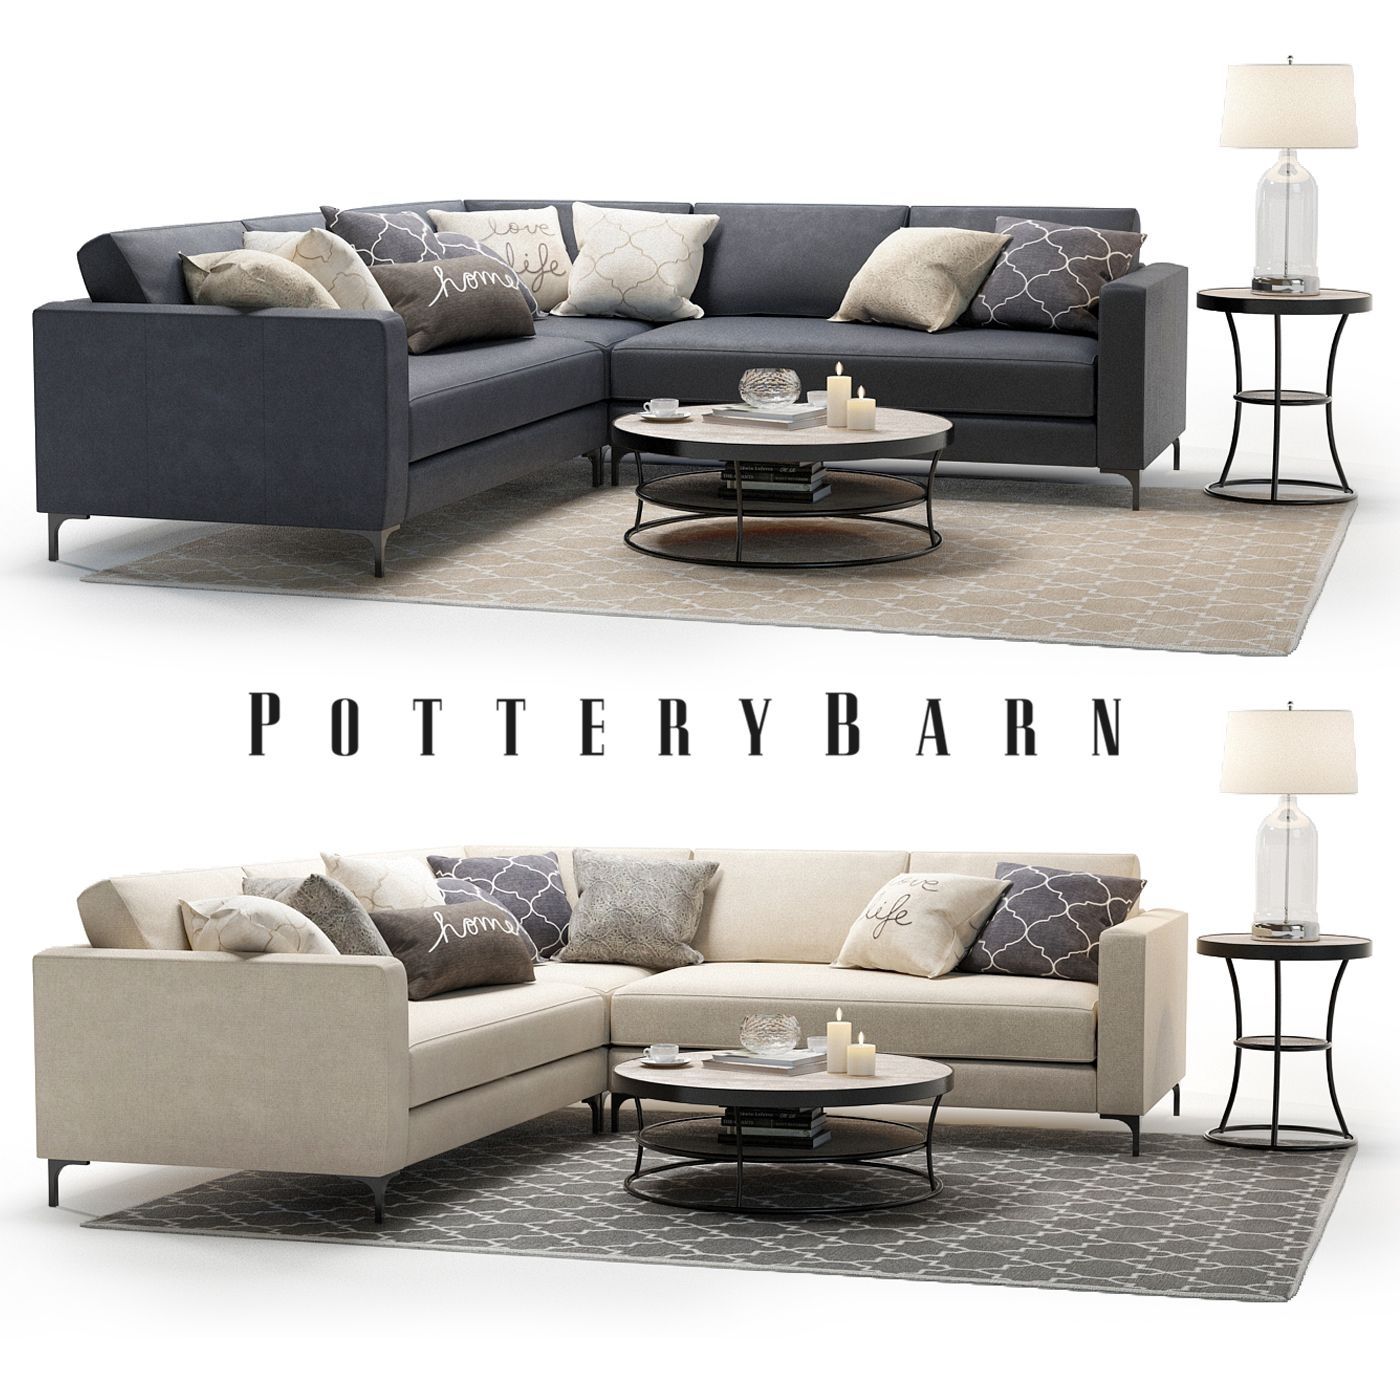 3d Model – Pottery Barn – Jake Sectional Sofa With Bartlett Intended For Pottery Barn Sectional Sofas (View 7 of 10)